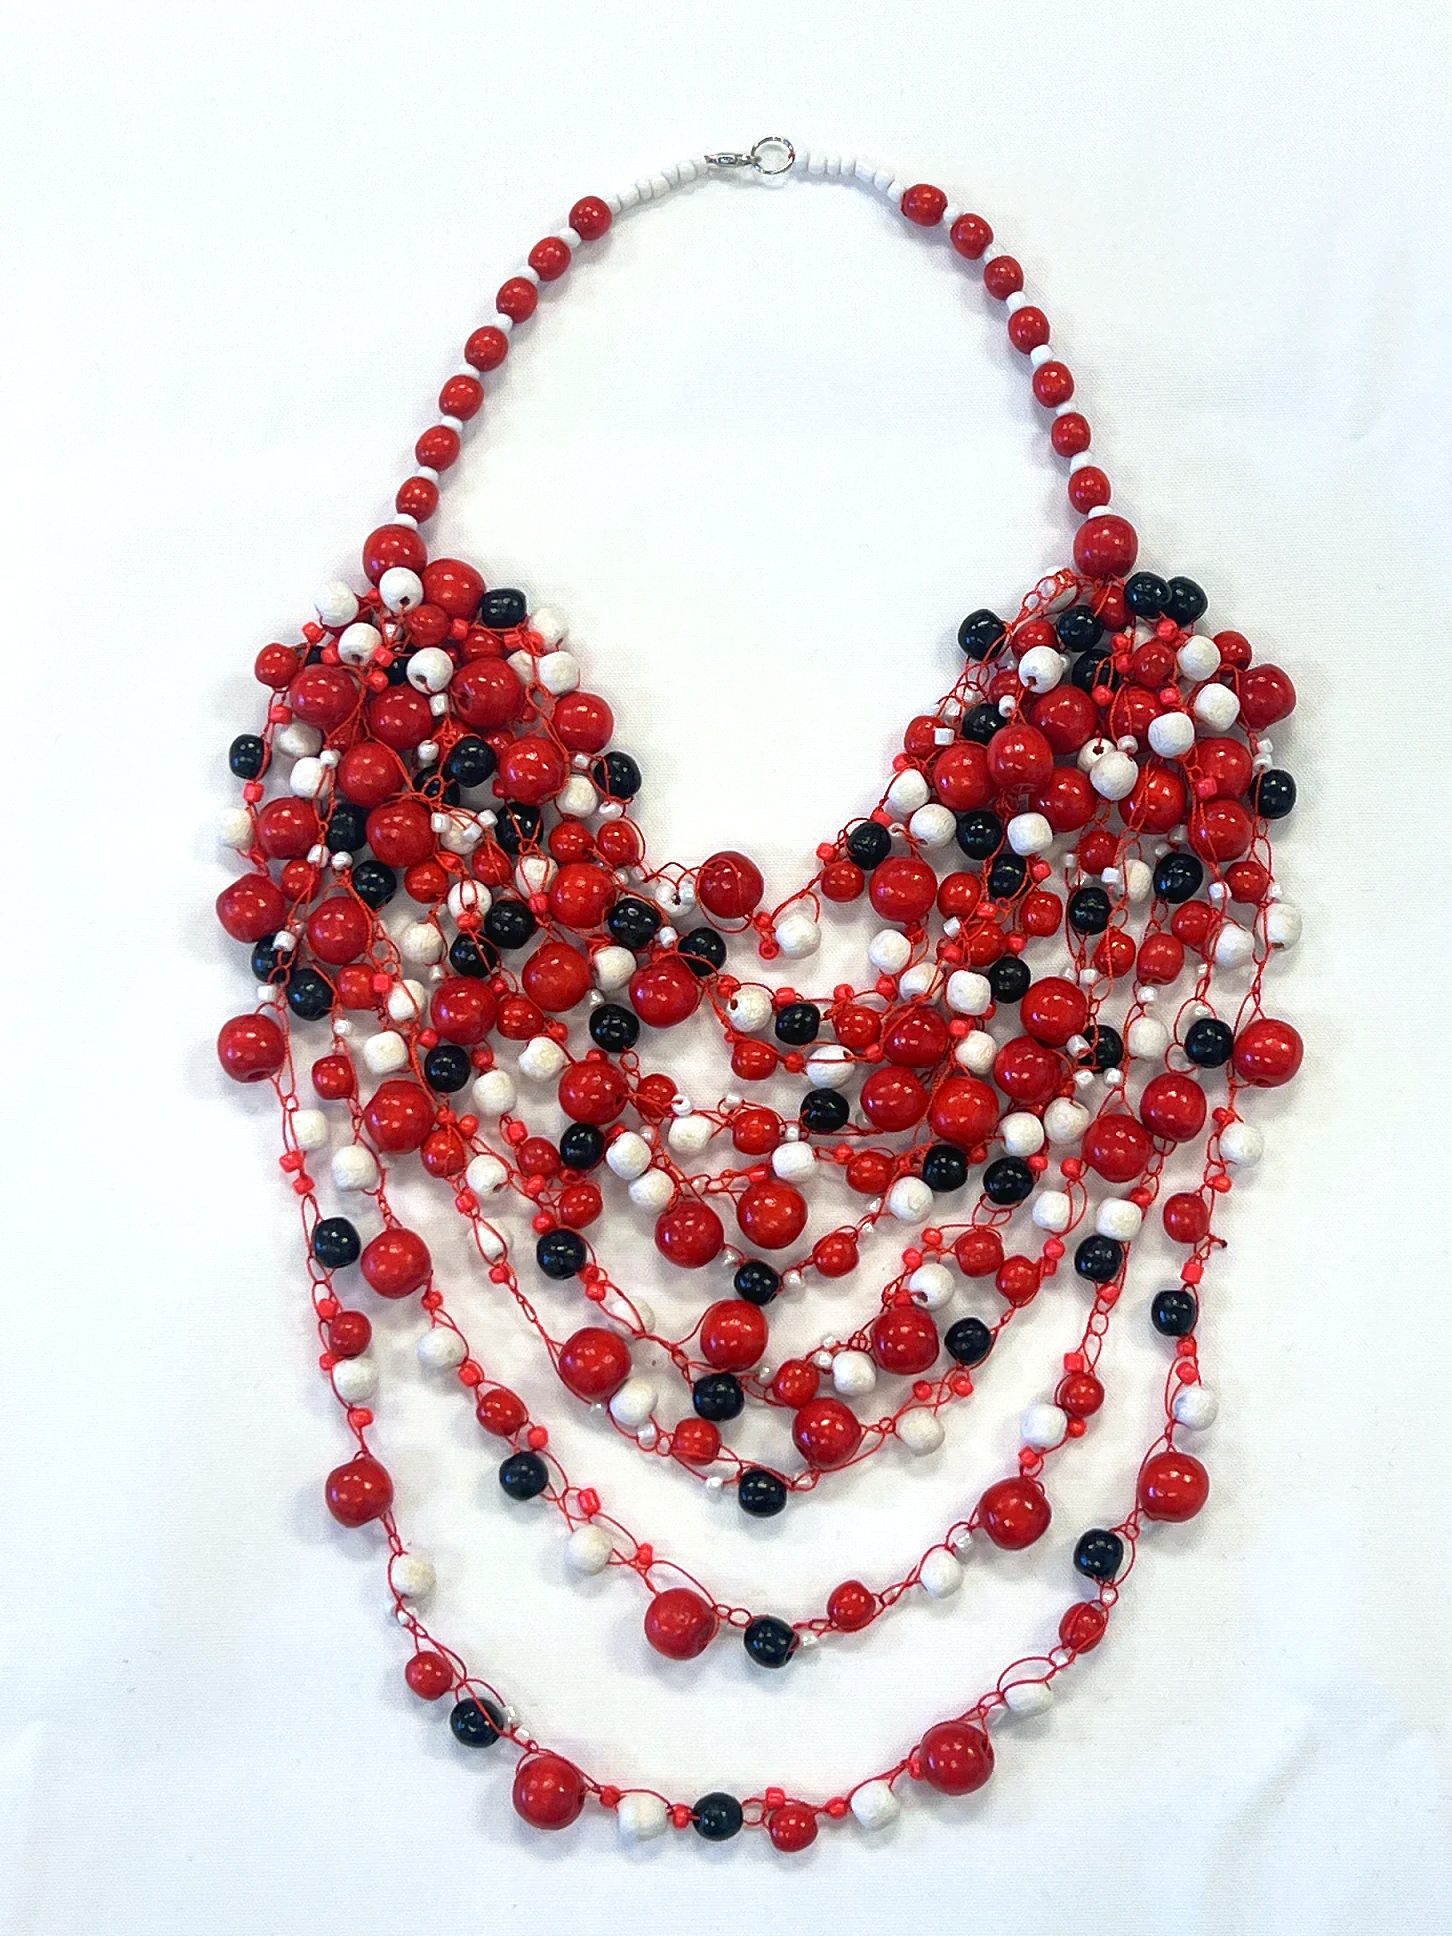 Artisan crafted woven glass and wood bead necklace. Red, white, black